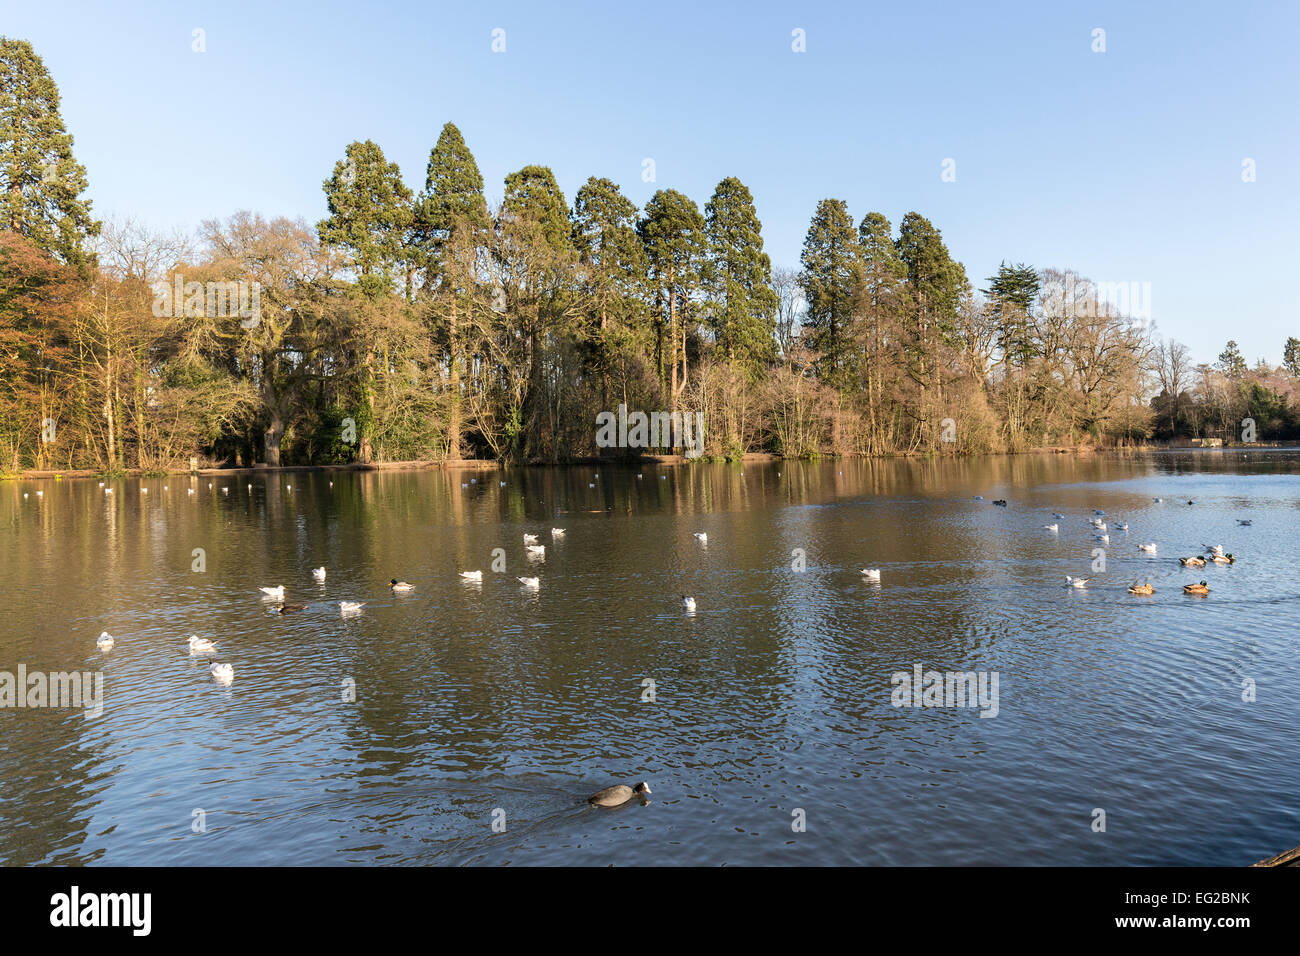 Water birds on lake at Tredegar House Country Park, Newport, Wales, UK Stock Photo